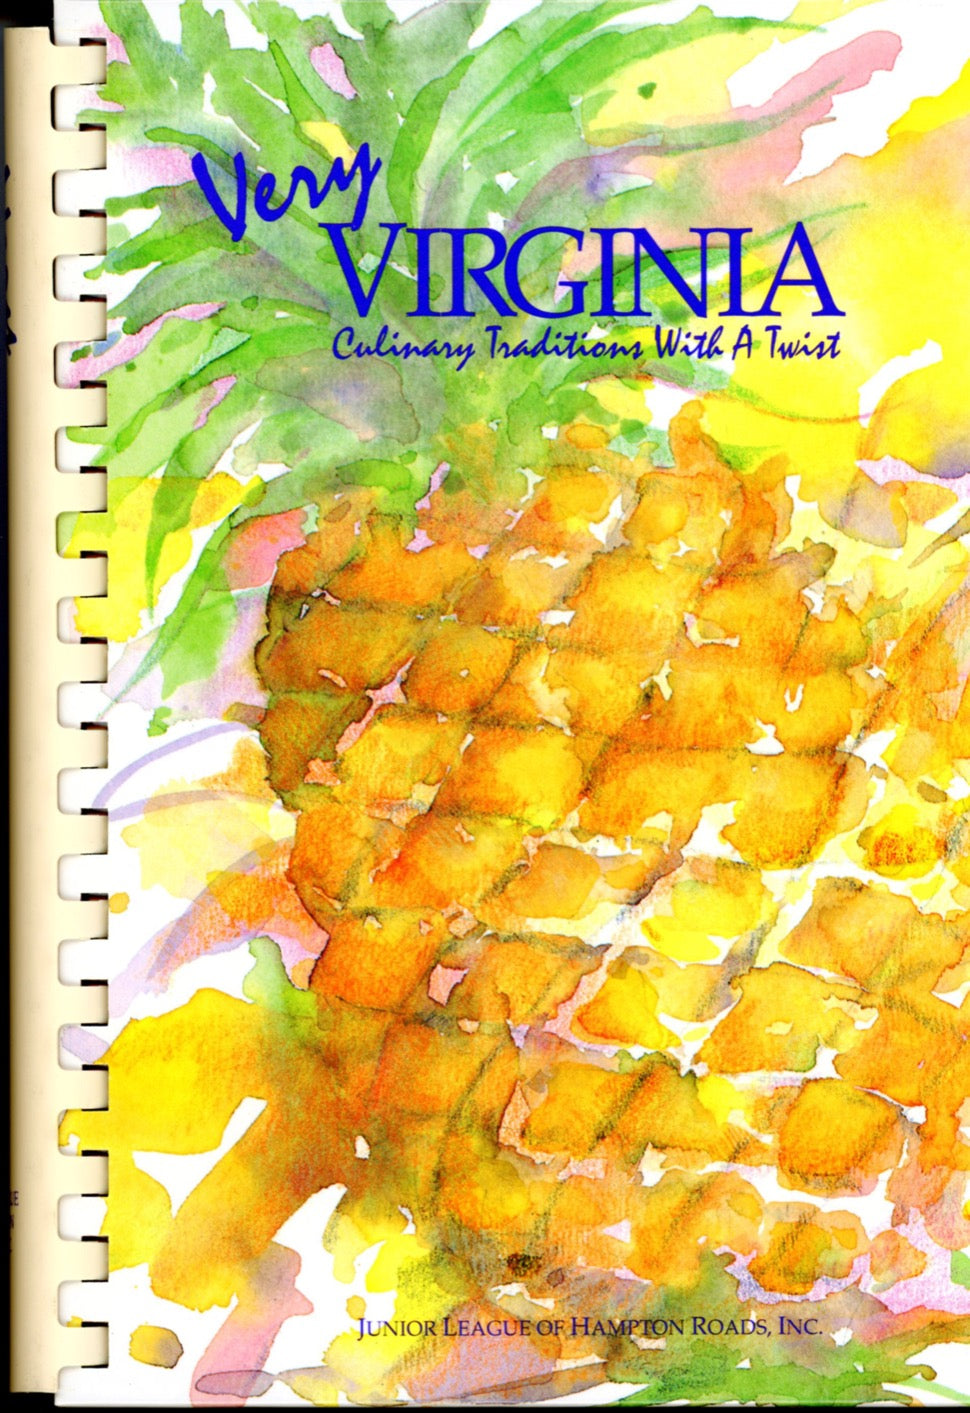 VERY VIRGINIA: Culinary Traditions With a Twist | Junior League of Hampton Roads | 1996 ©1995